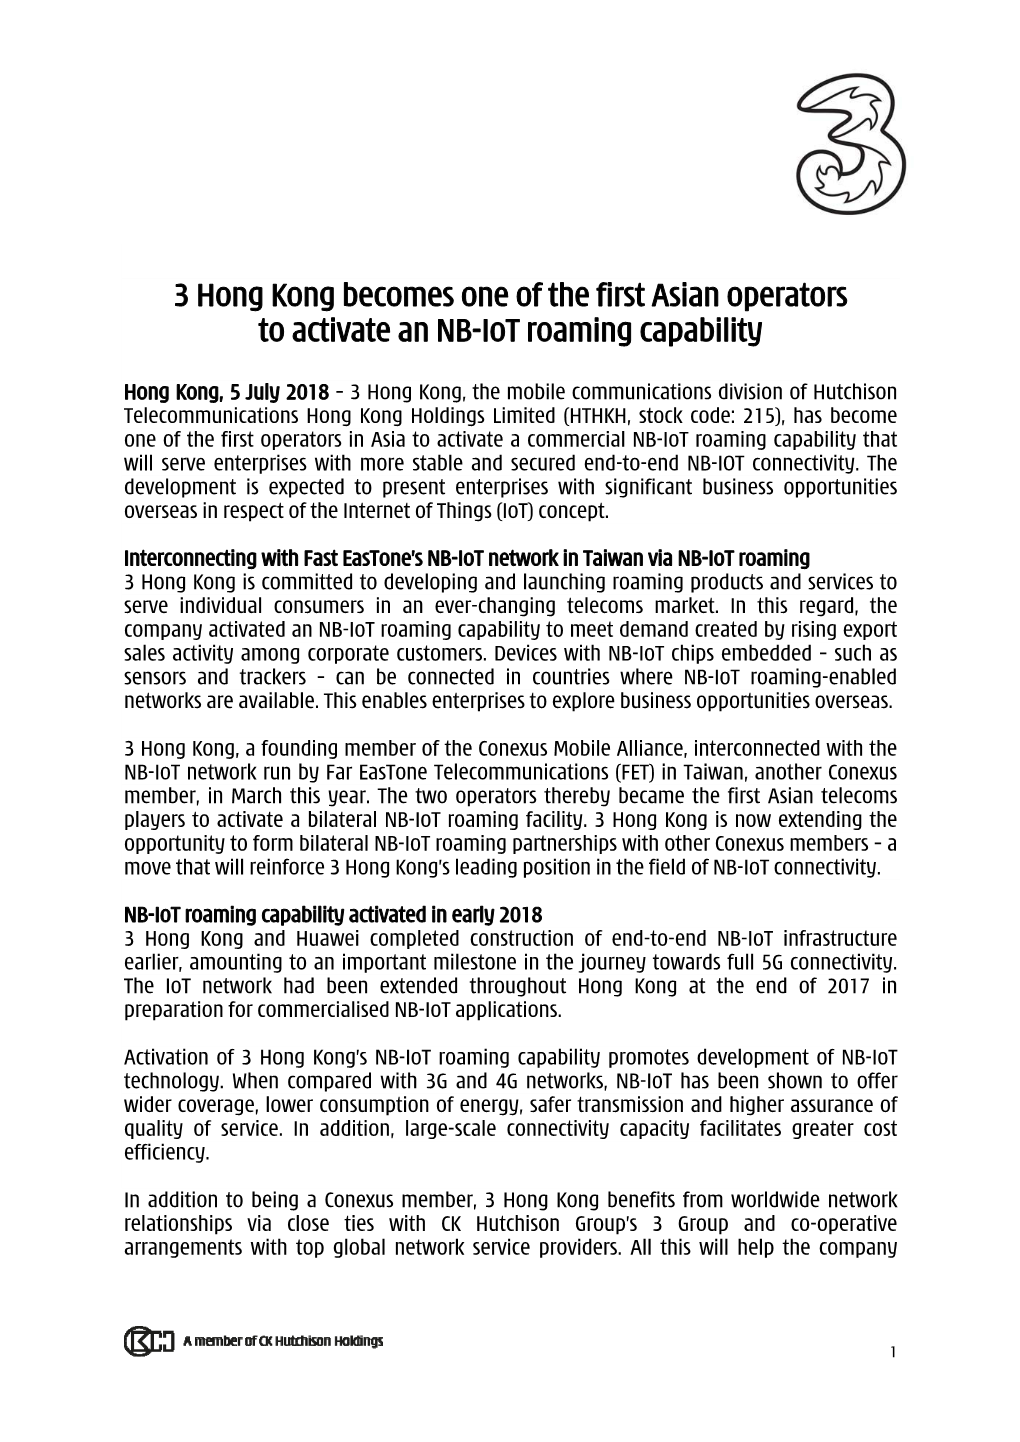 3 Hong Kong Becomes One of the First Asian Operators to Activate an NB-Iot Roaming Capability